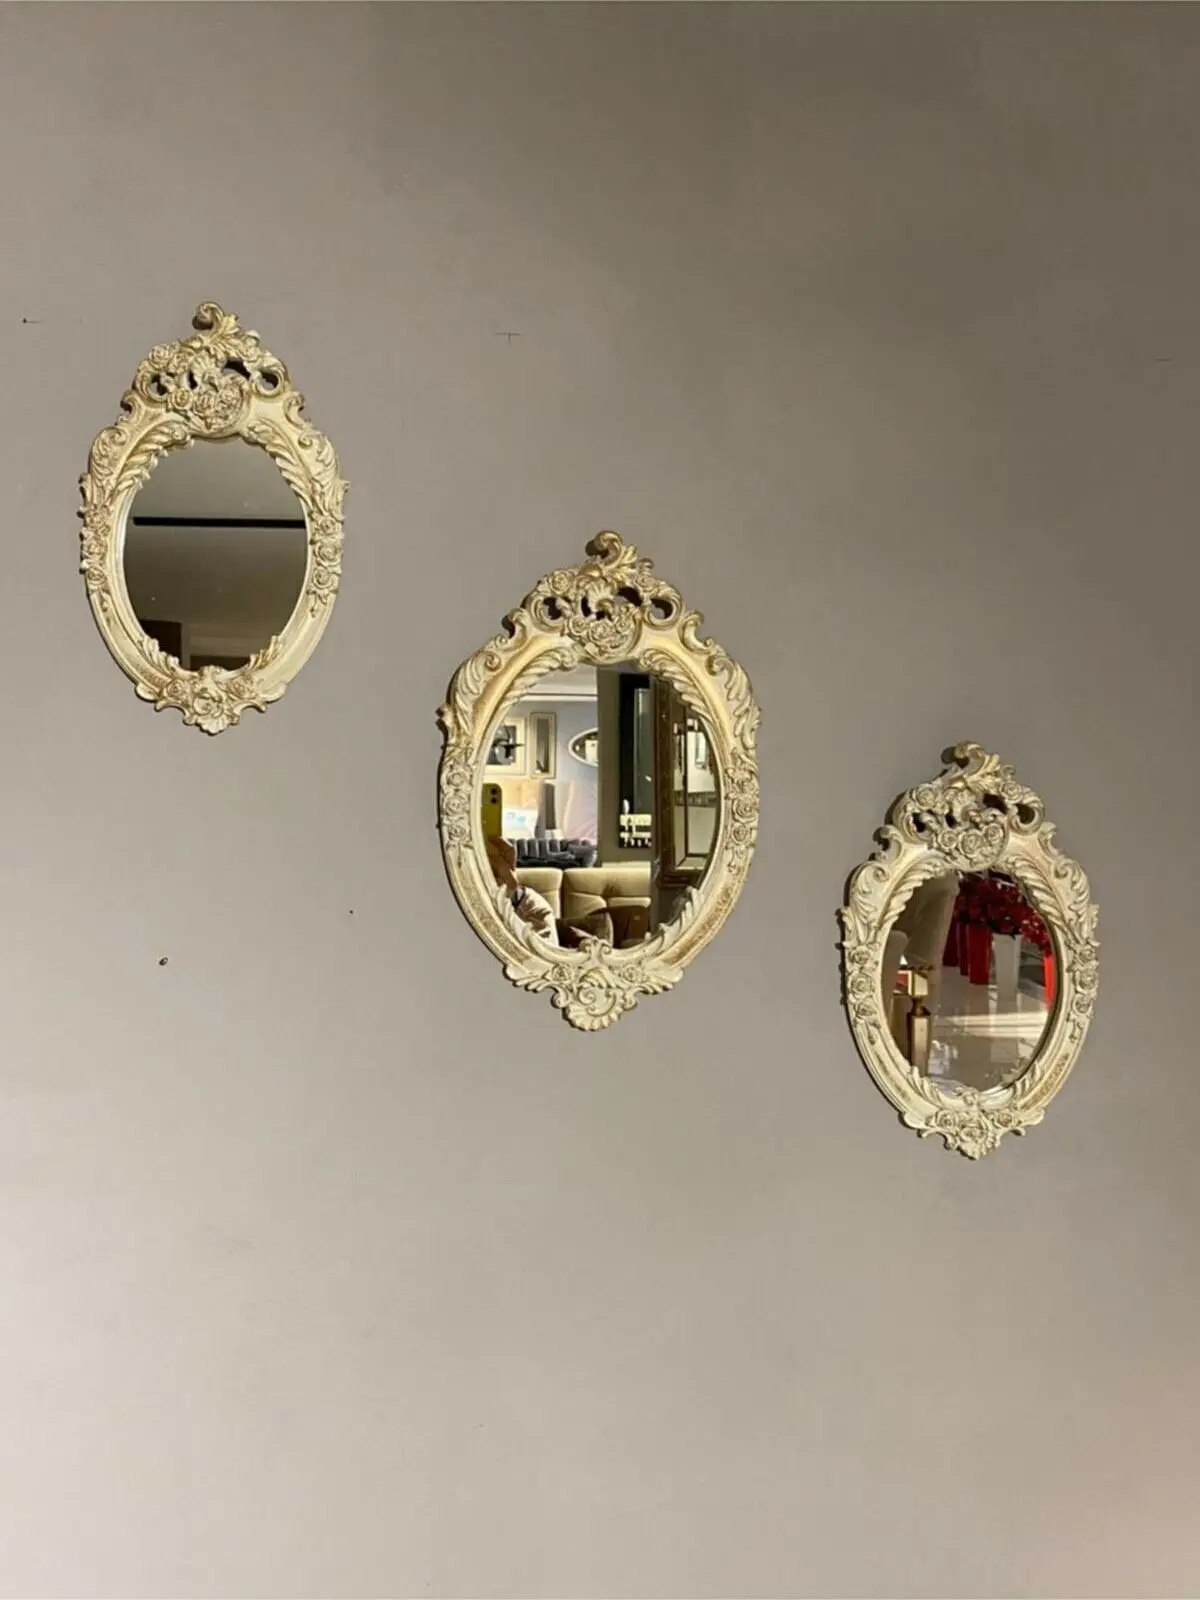 3 Pc Triple Decorative Mirror Tumbled Wall Object Console Furniture Body Length Decor Bathroom Made In From Turkey